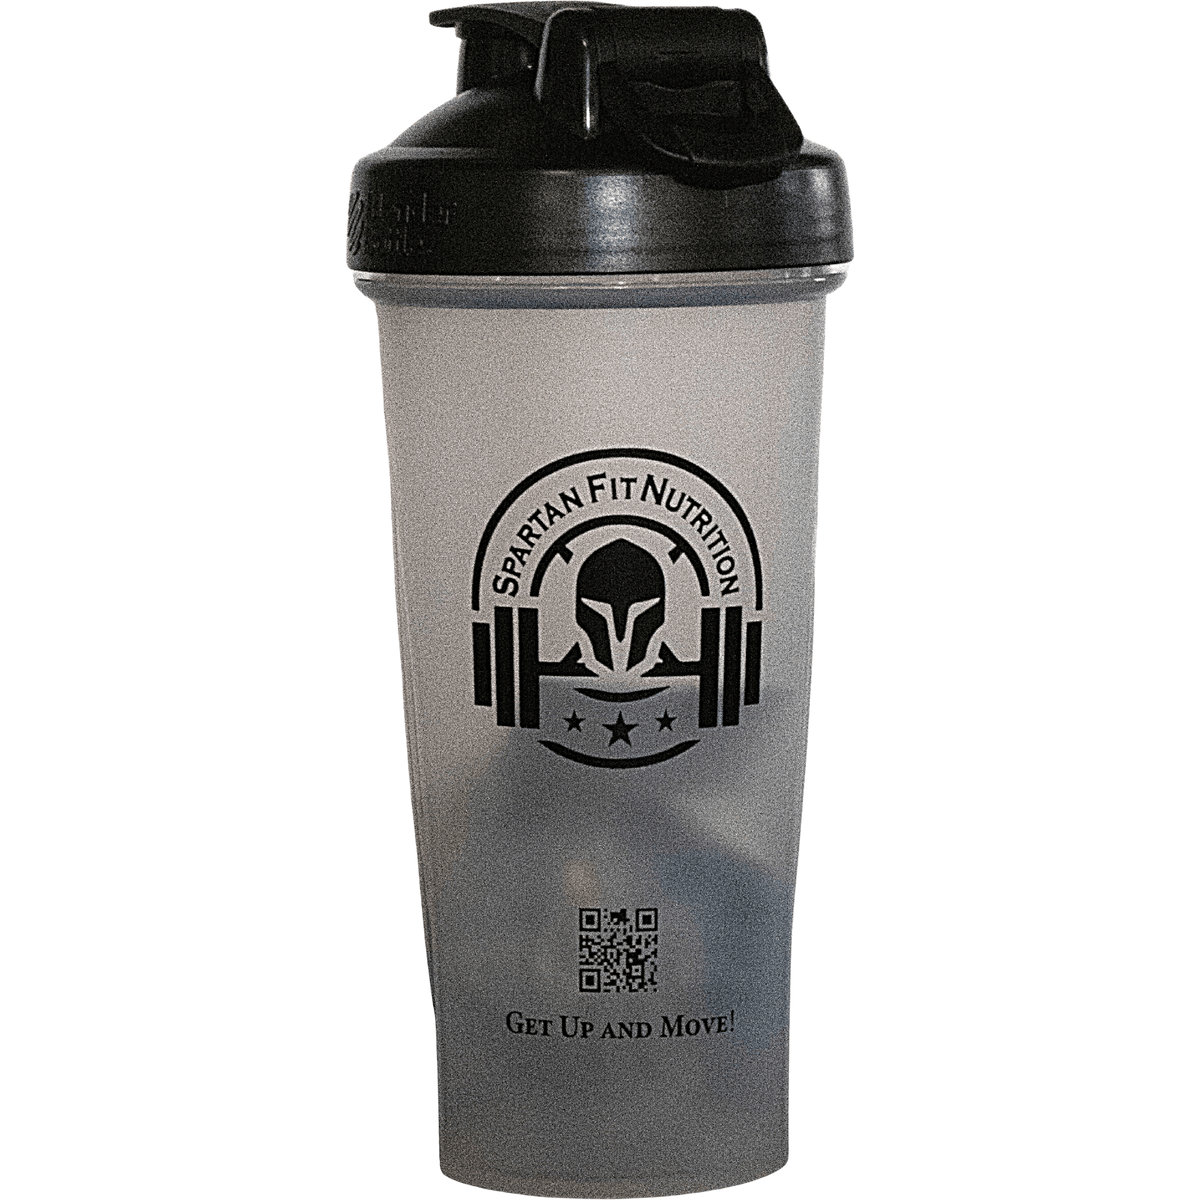 BeSpartanFit Accessories BlenderBottle Spartan Fit Nutrition for movement muscle mood and motivation